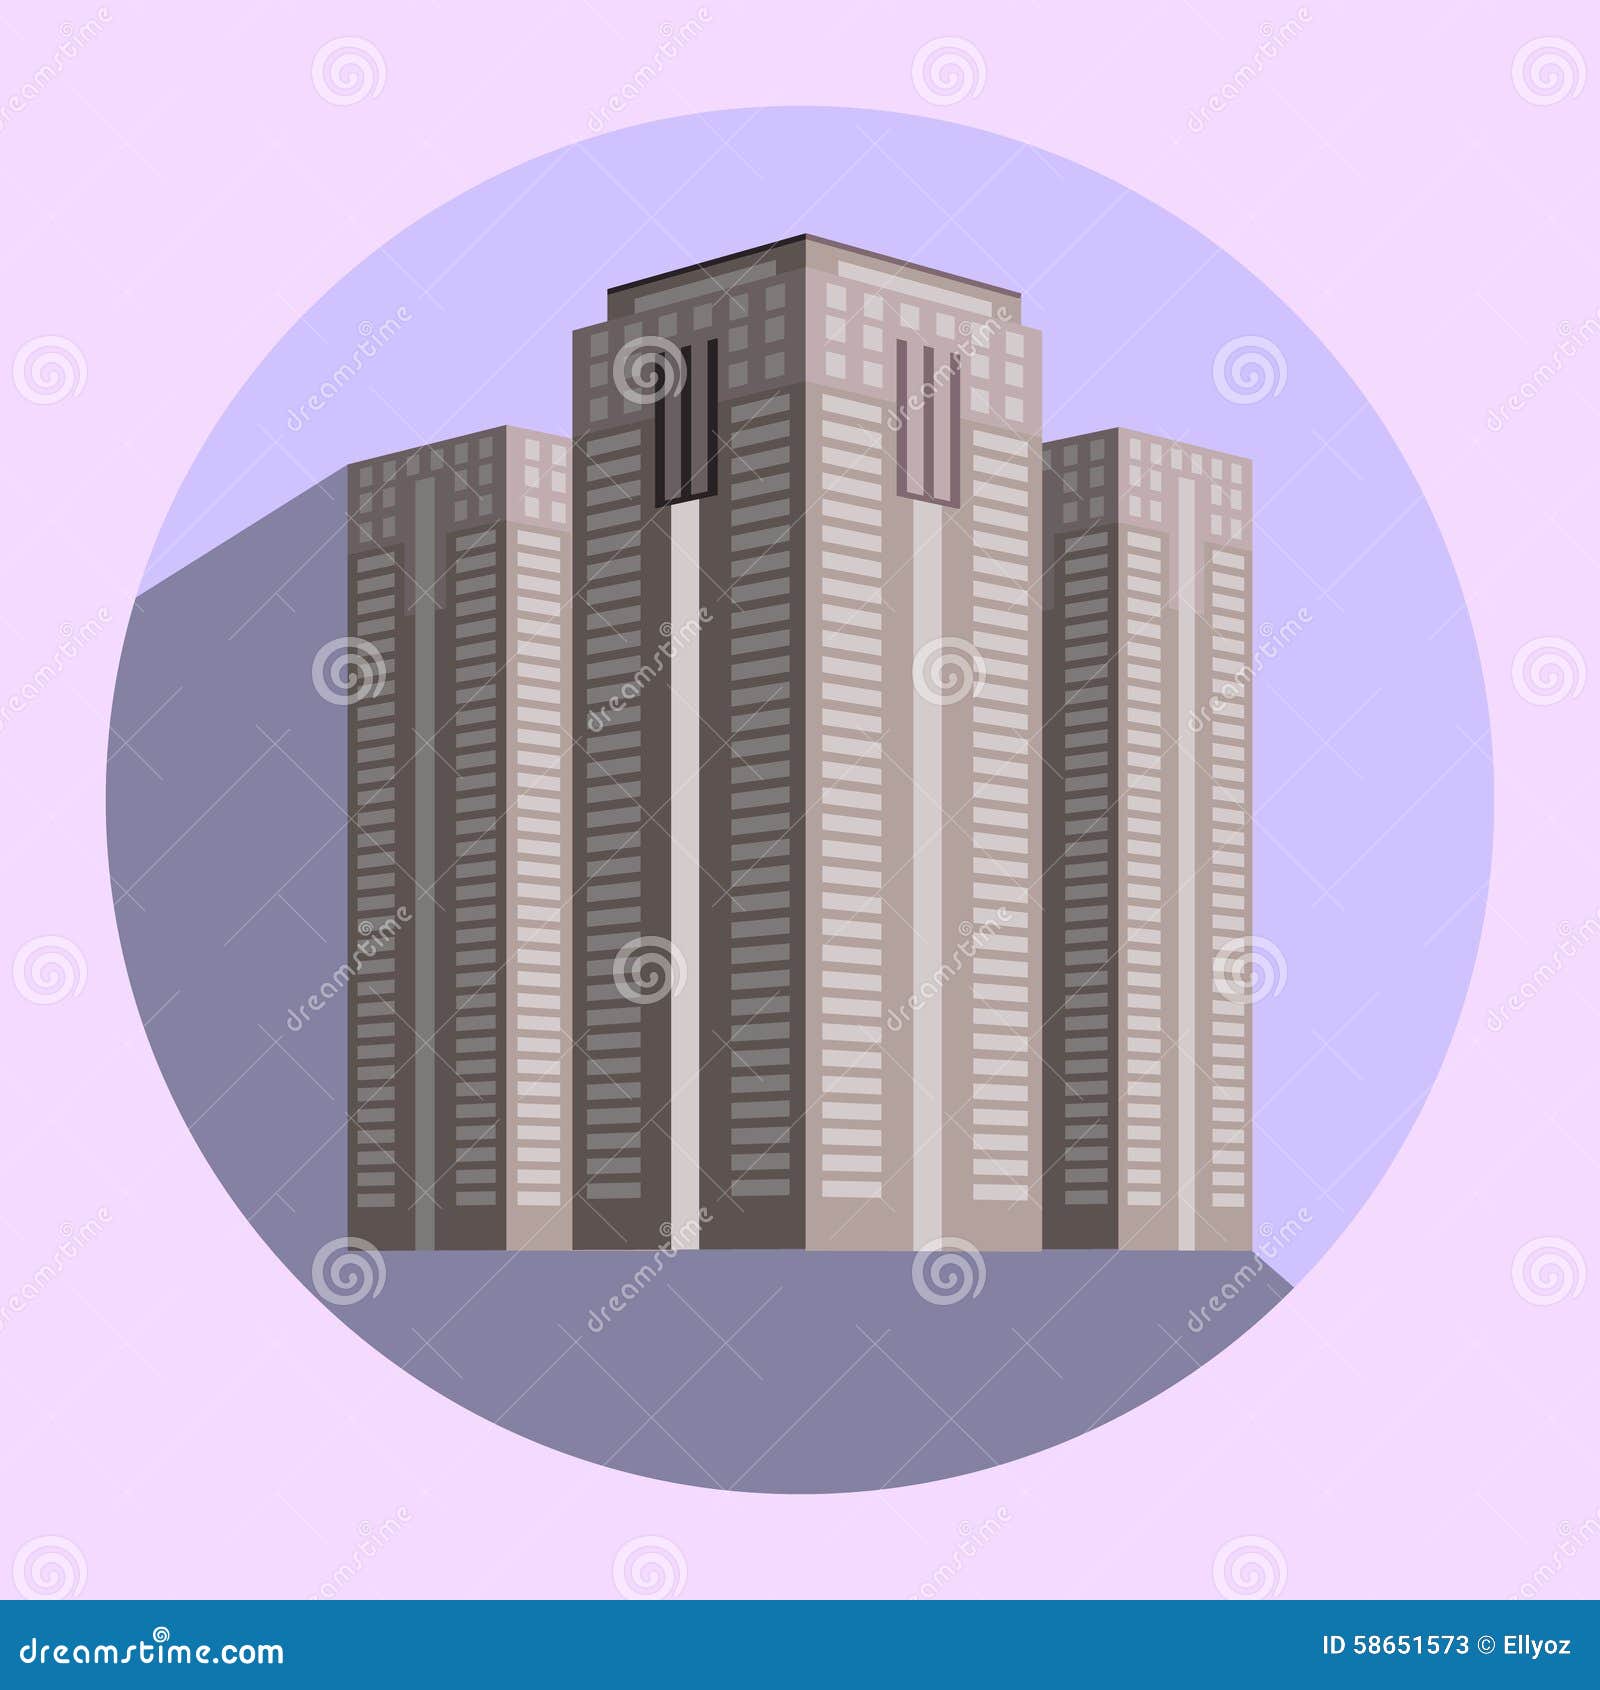 City Skyscrapers stock vector. Illustration of infographics - 58651573